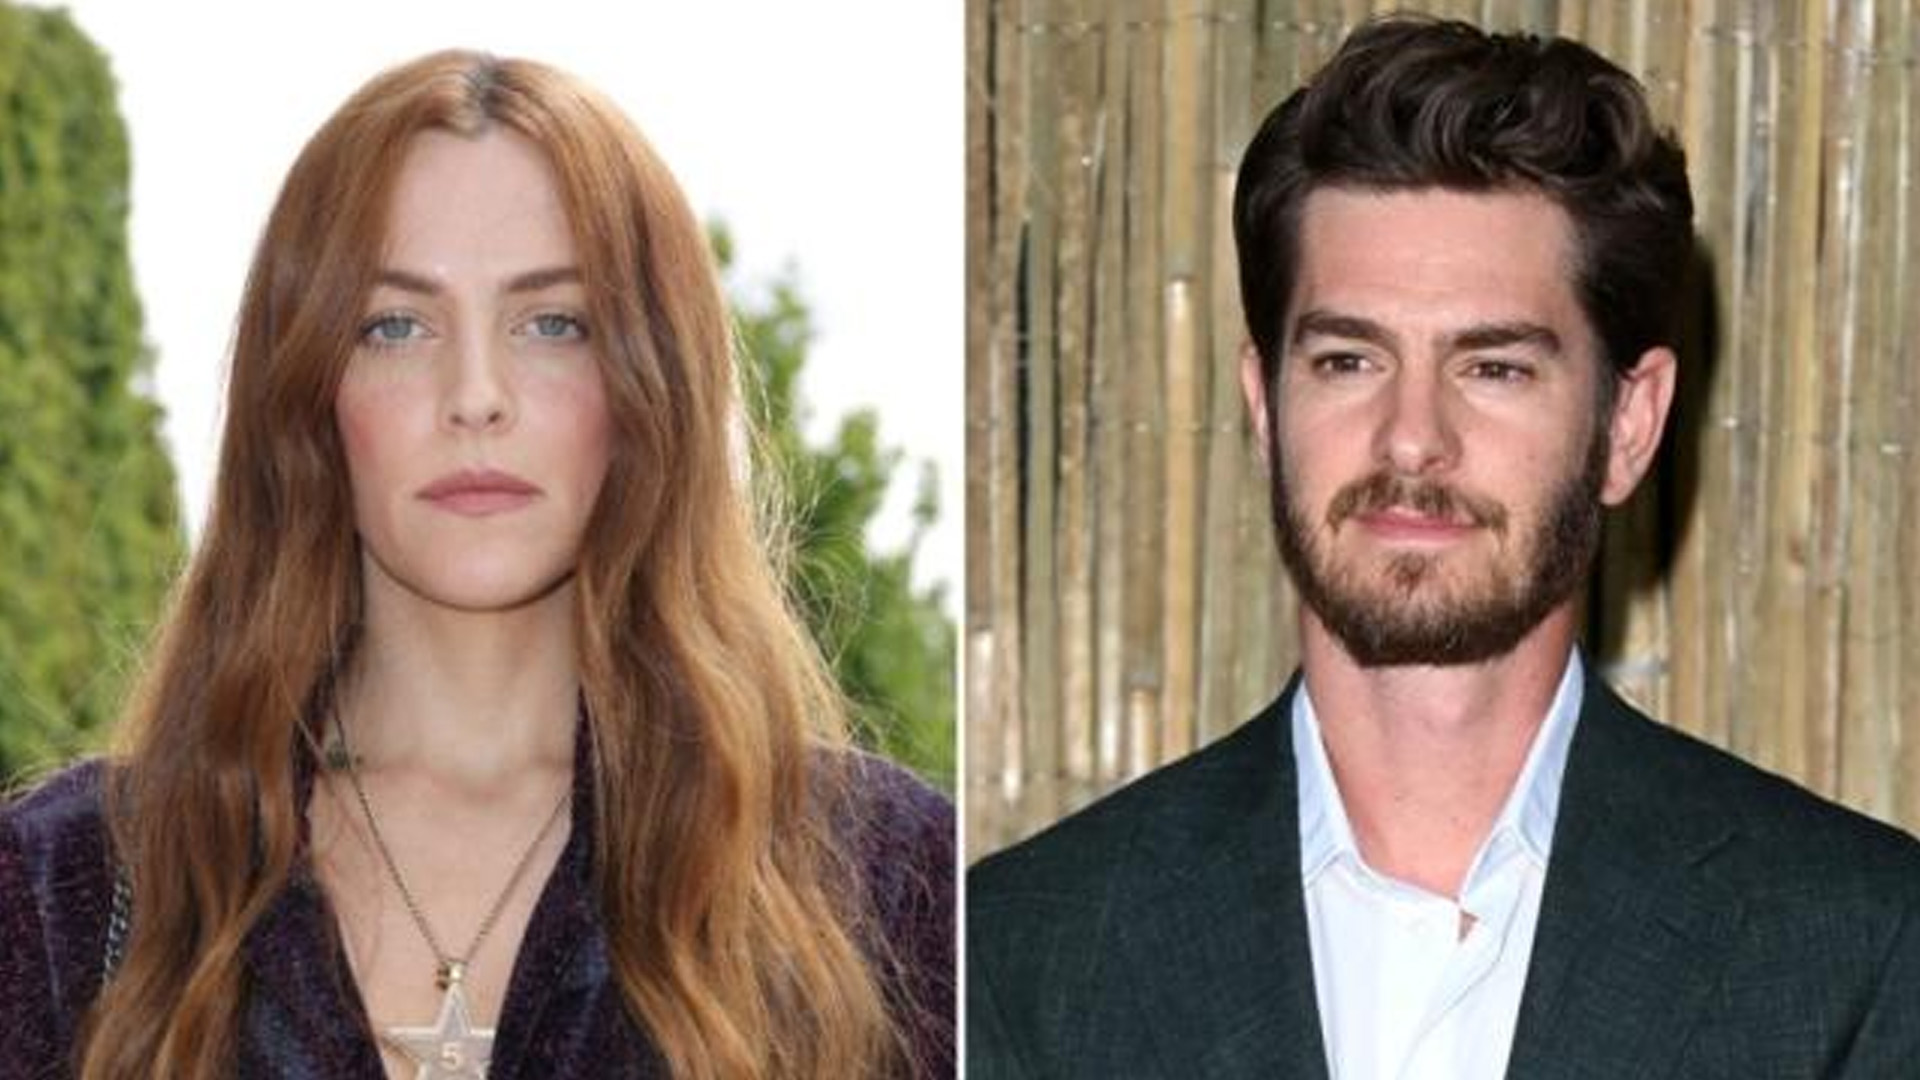 How Riley Keough Sent Andrew Garfield to Hospital?